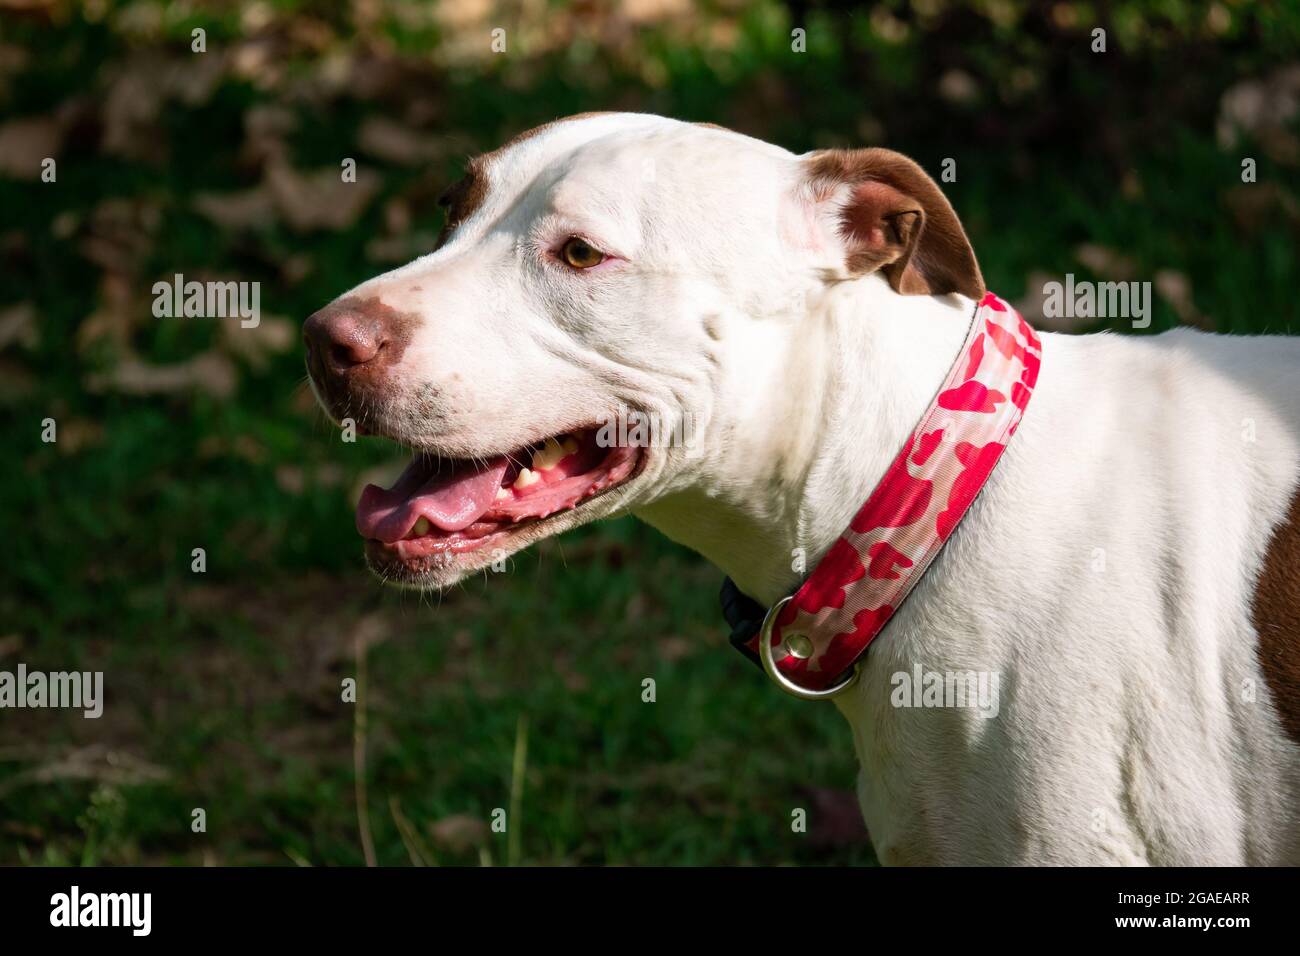 American Pitbull Terrier Dog is Happy Walking in the Public Park in Medellin, Colombia Stock Photo